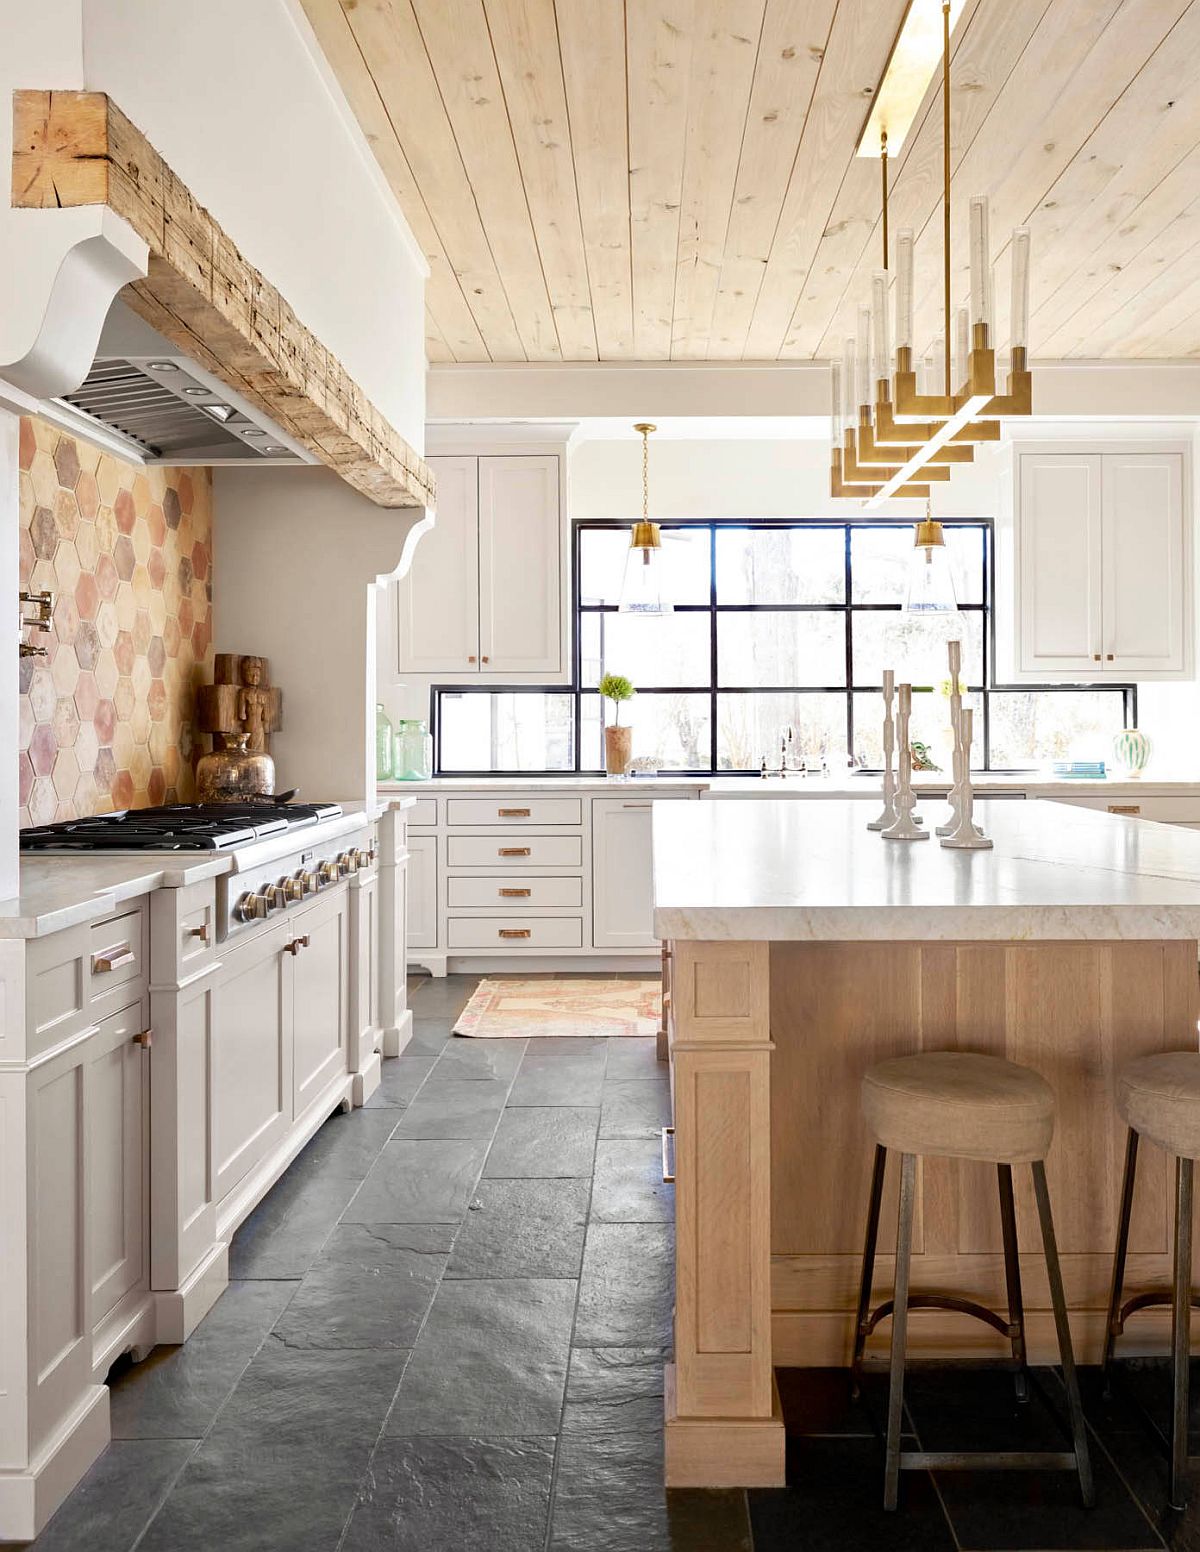 Beautiful and custom backsplash adds to the farmhouse style of the kitchen